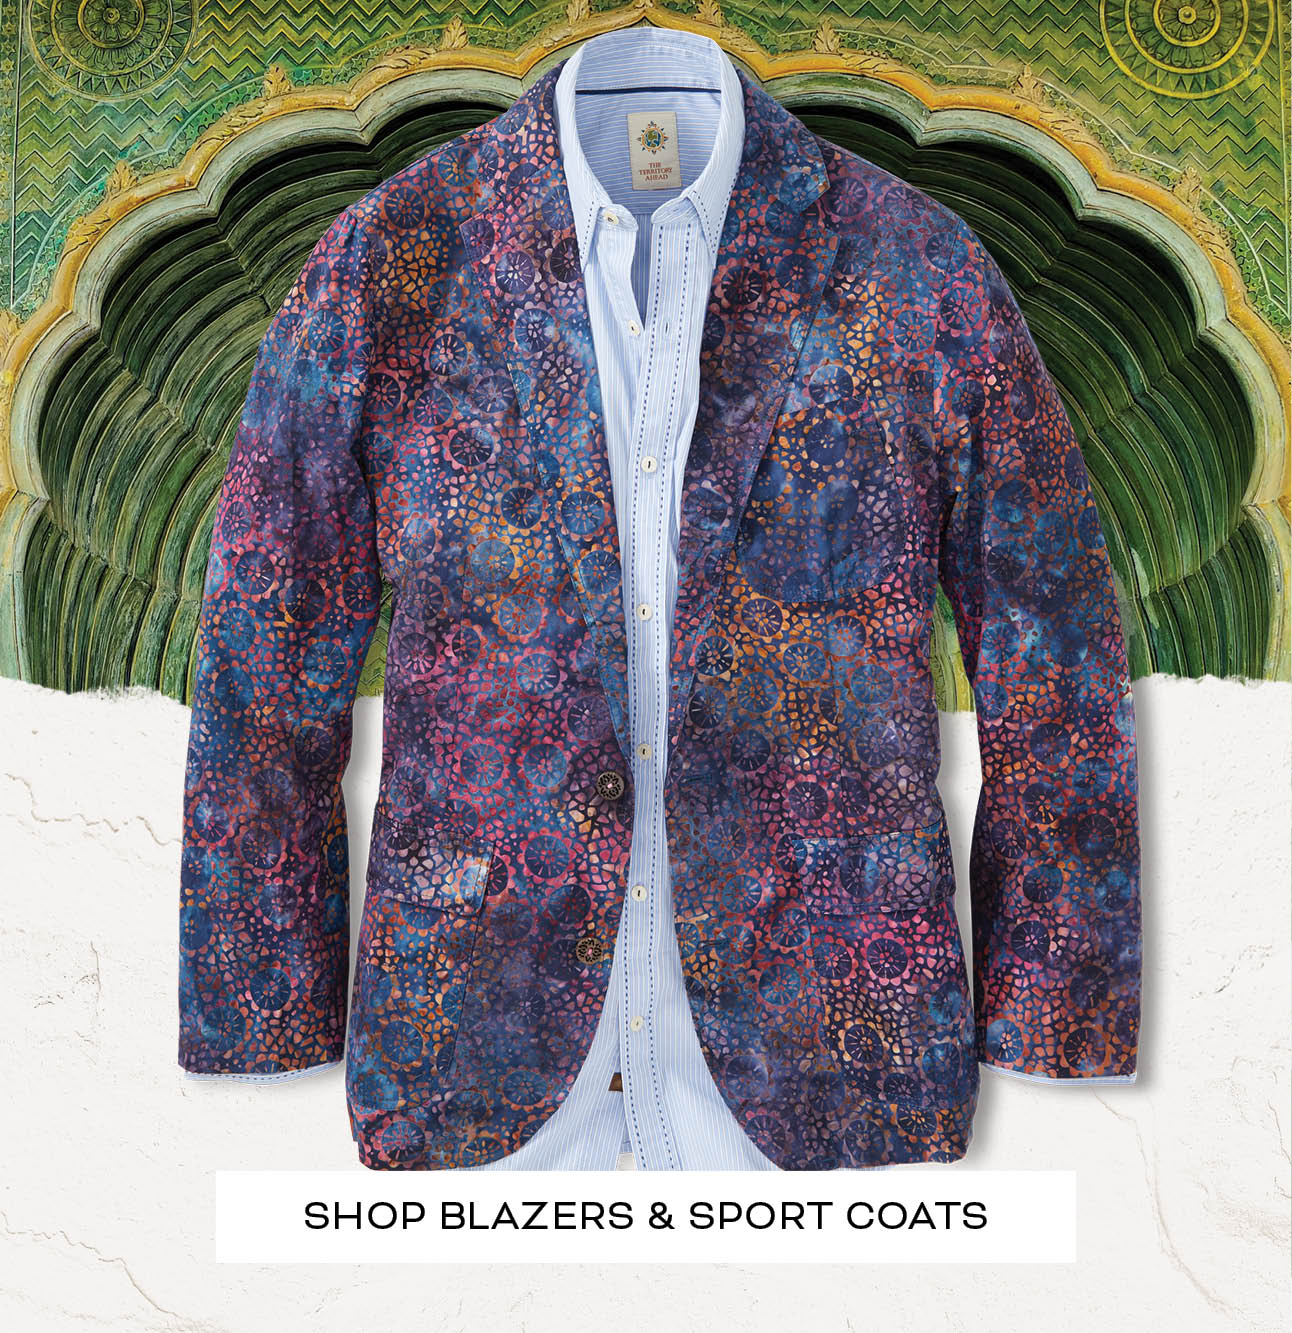 Blazers & Outerwear – The Territory Ahead